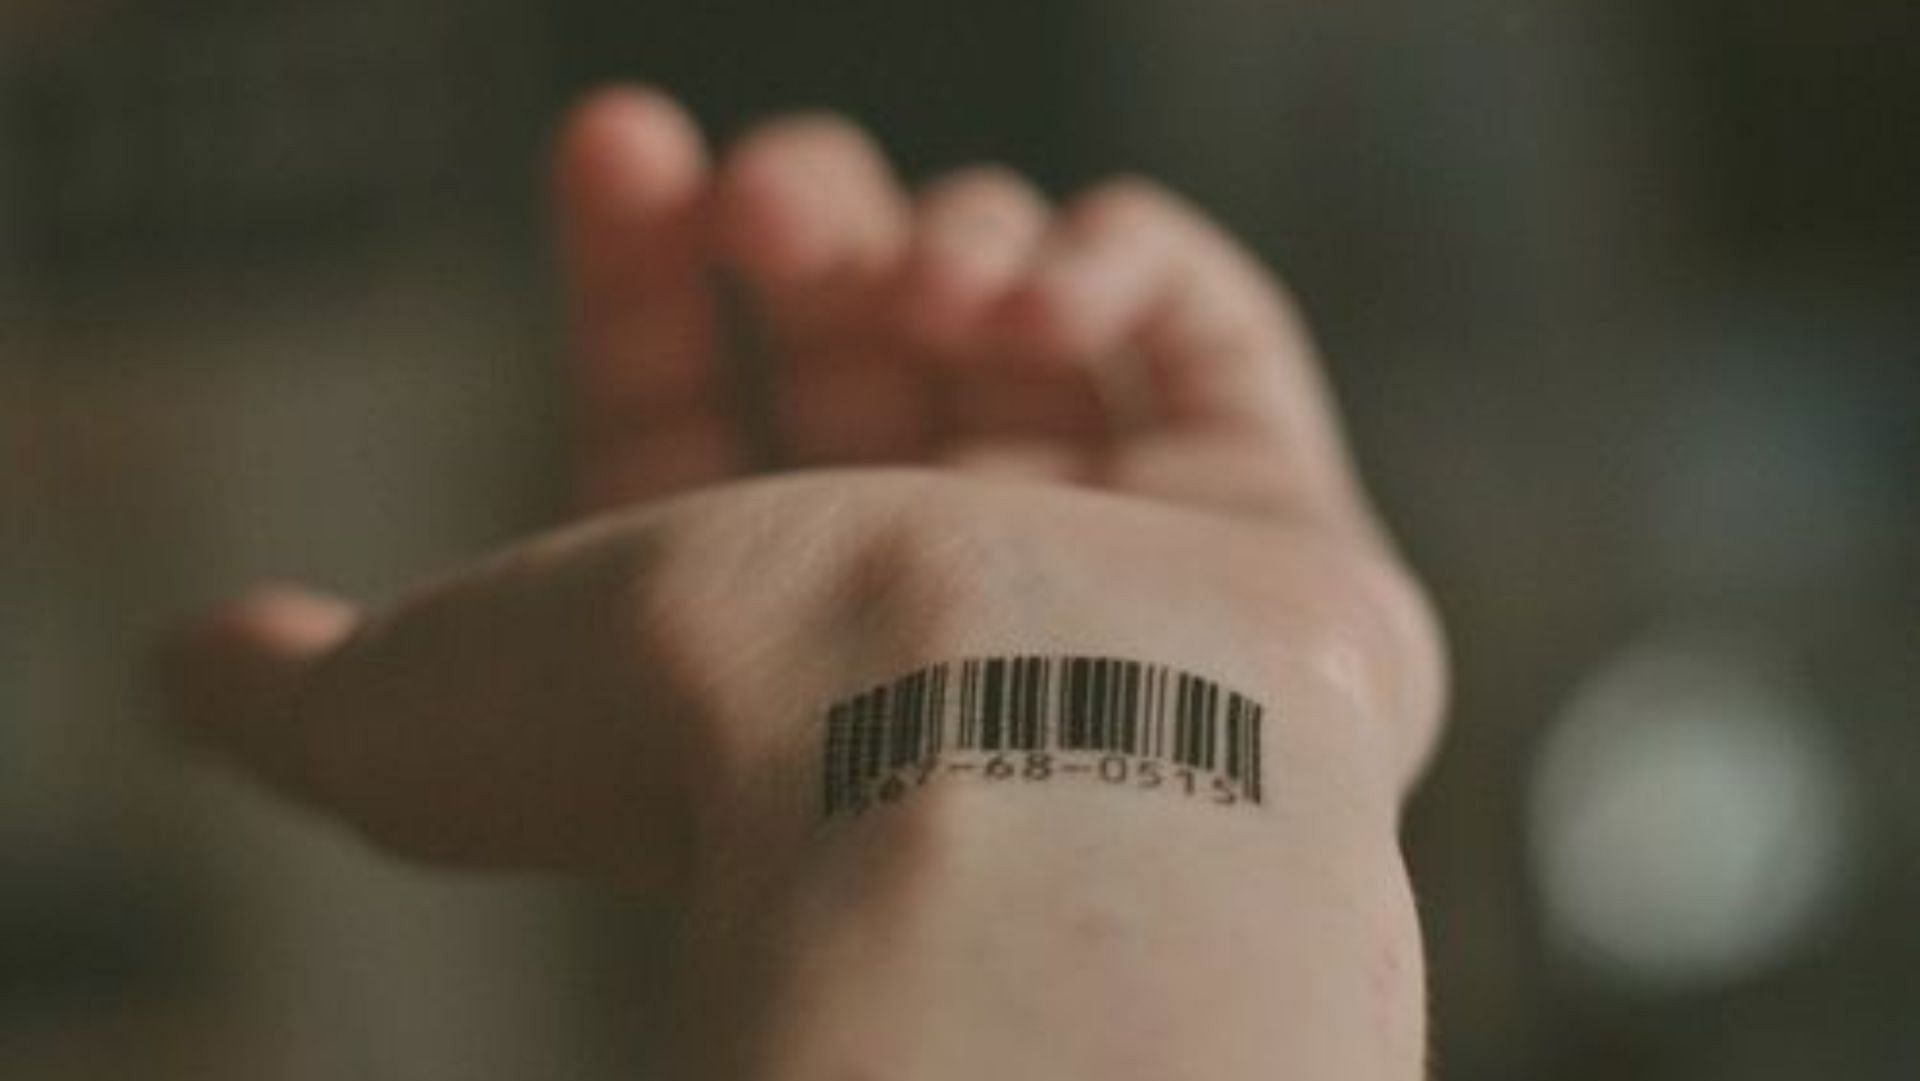 Aliens Tattoo - A tattoo with a QR code is both... | Facebook